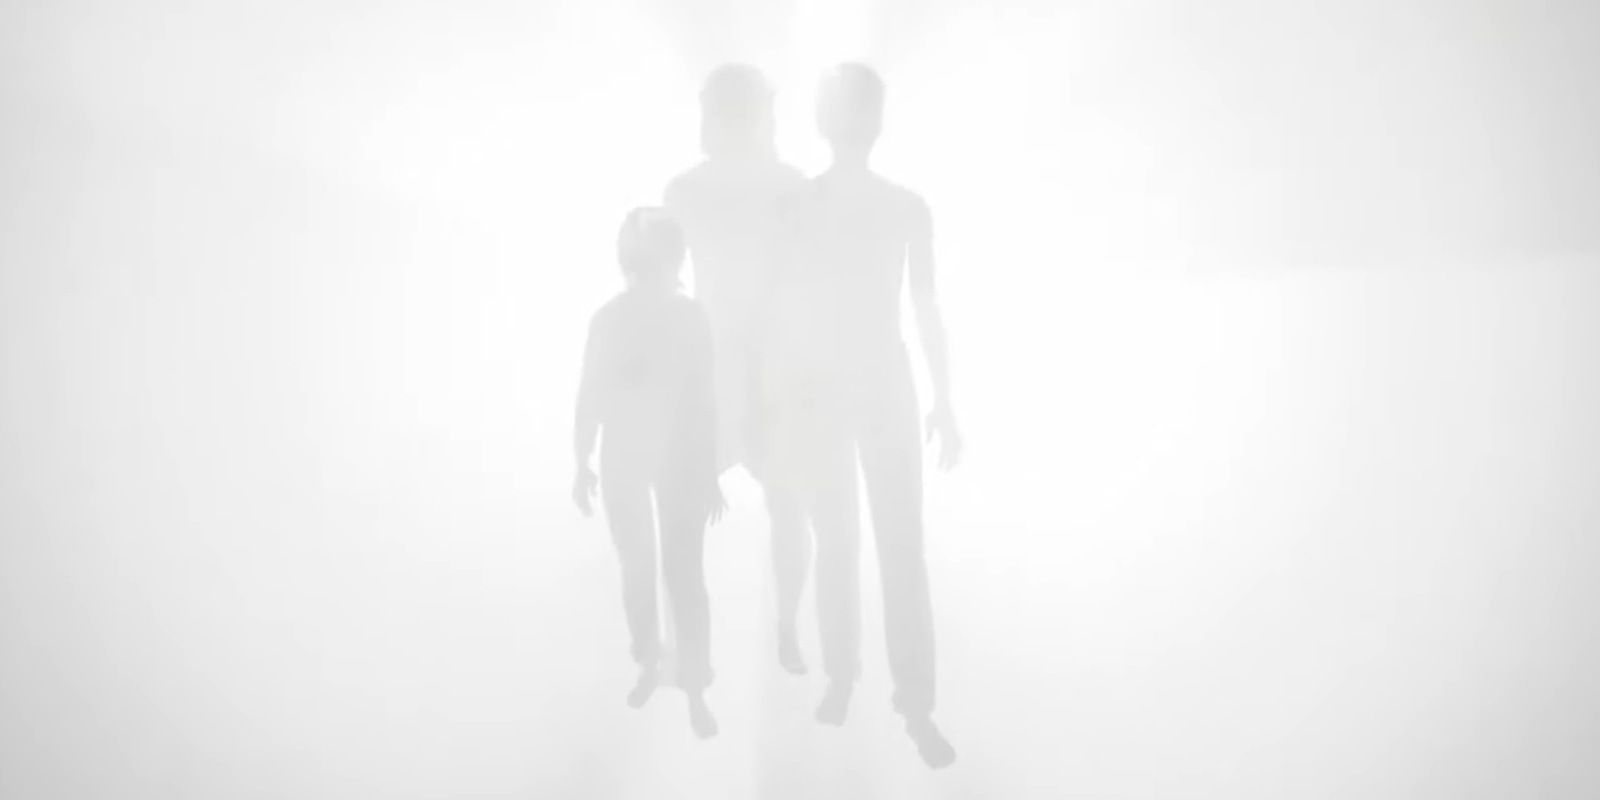 A family's outline is seen through the fod_Visage